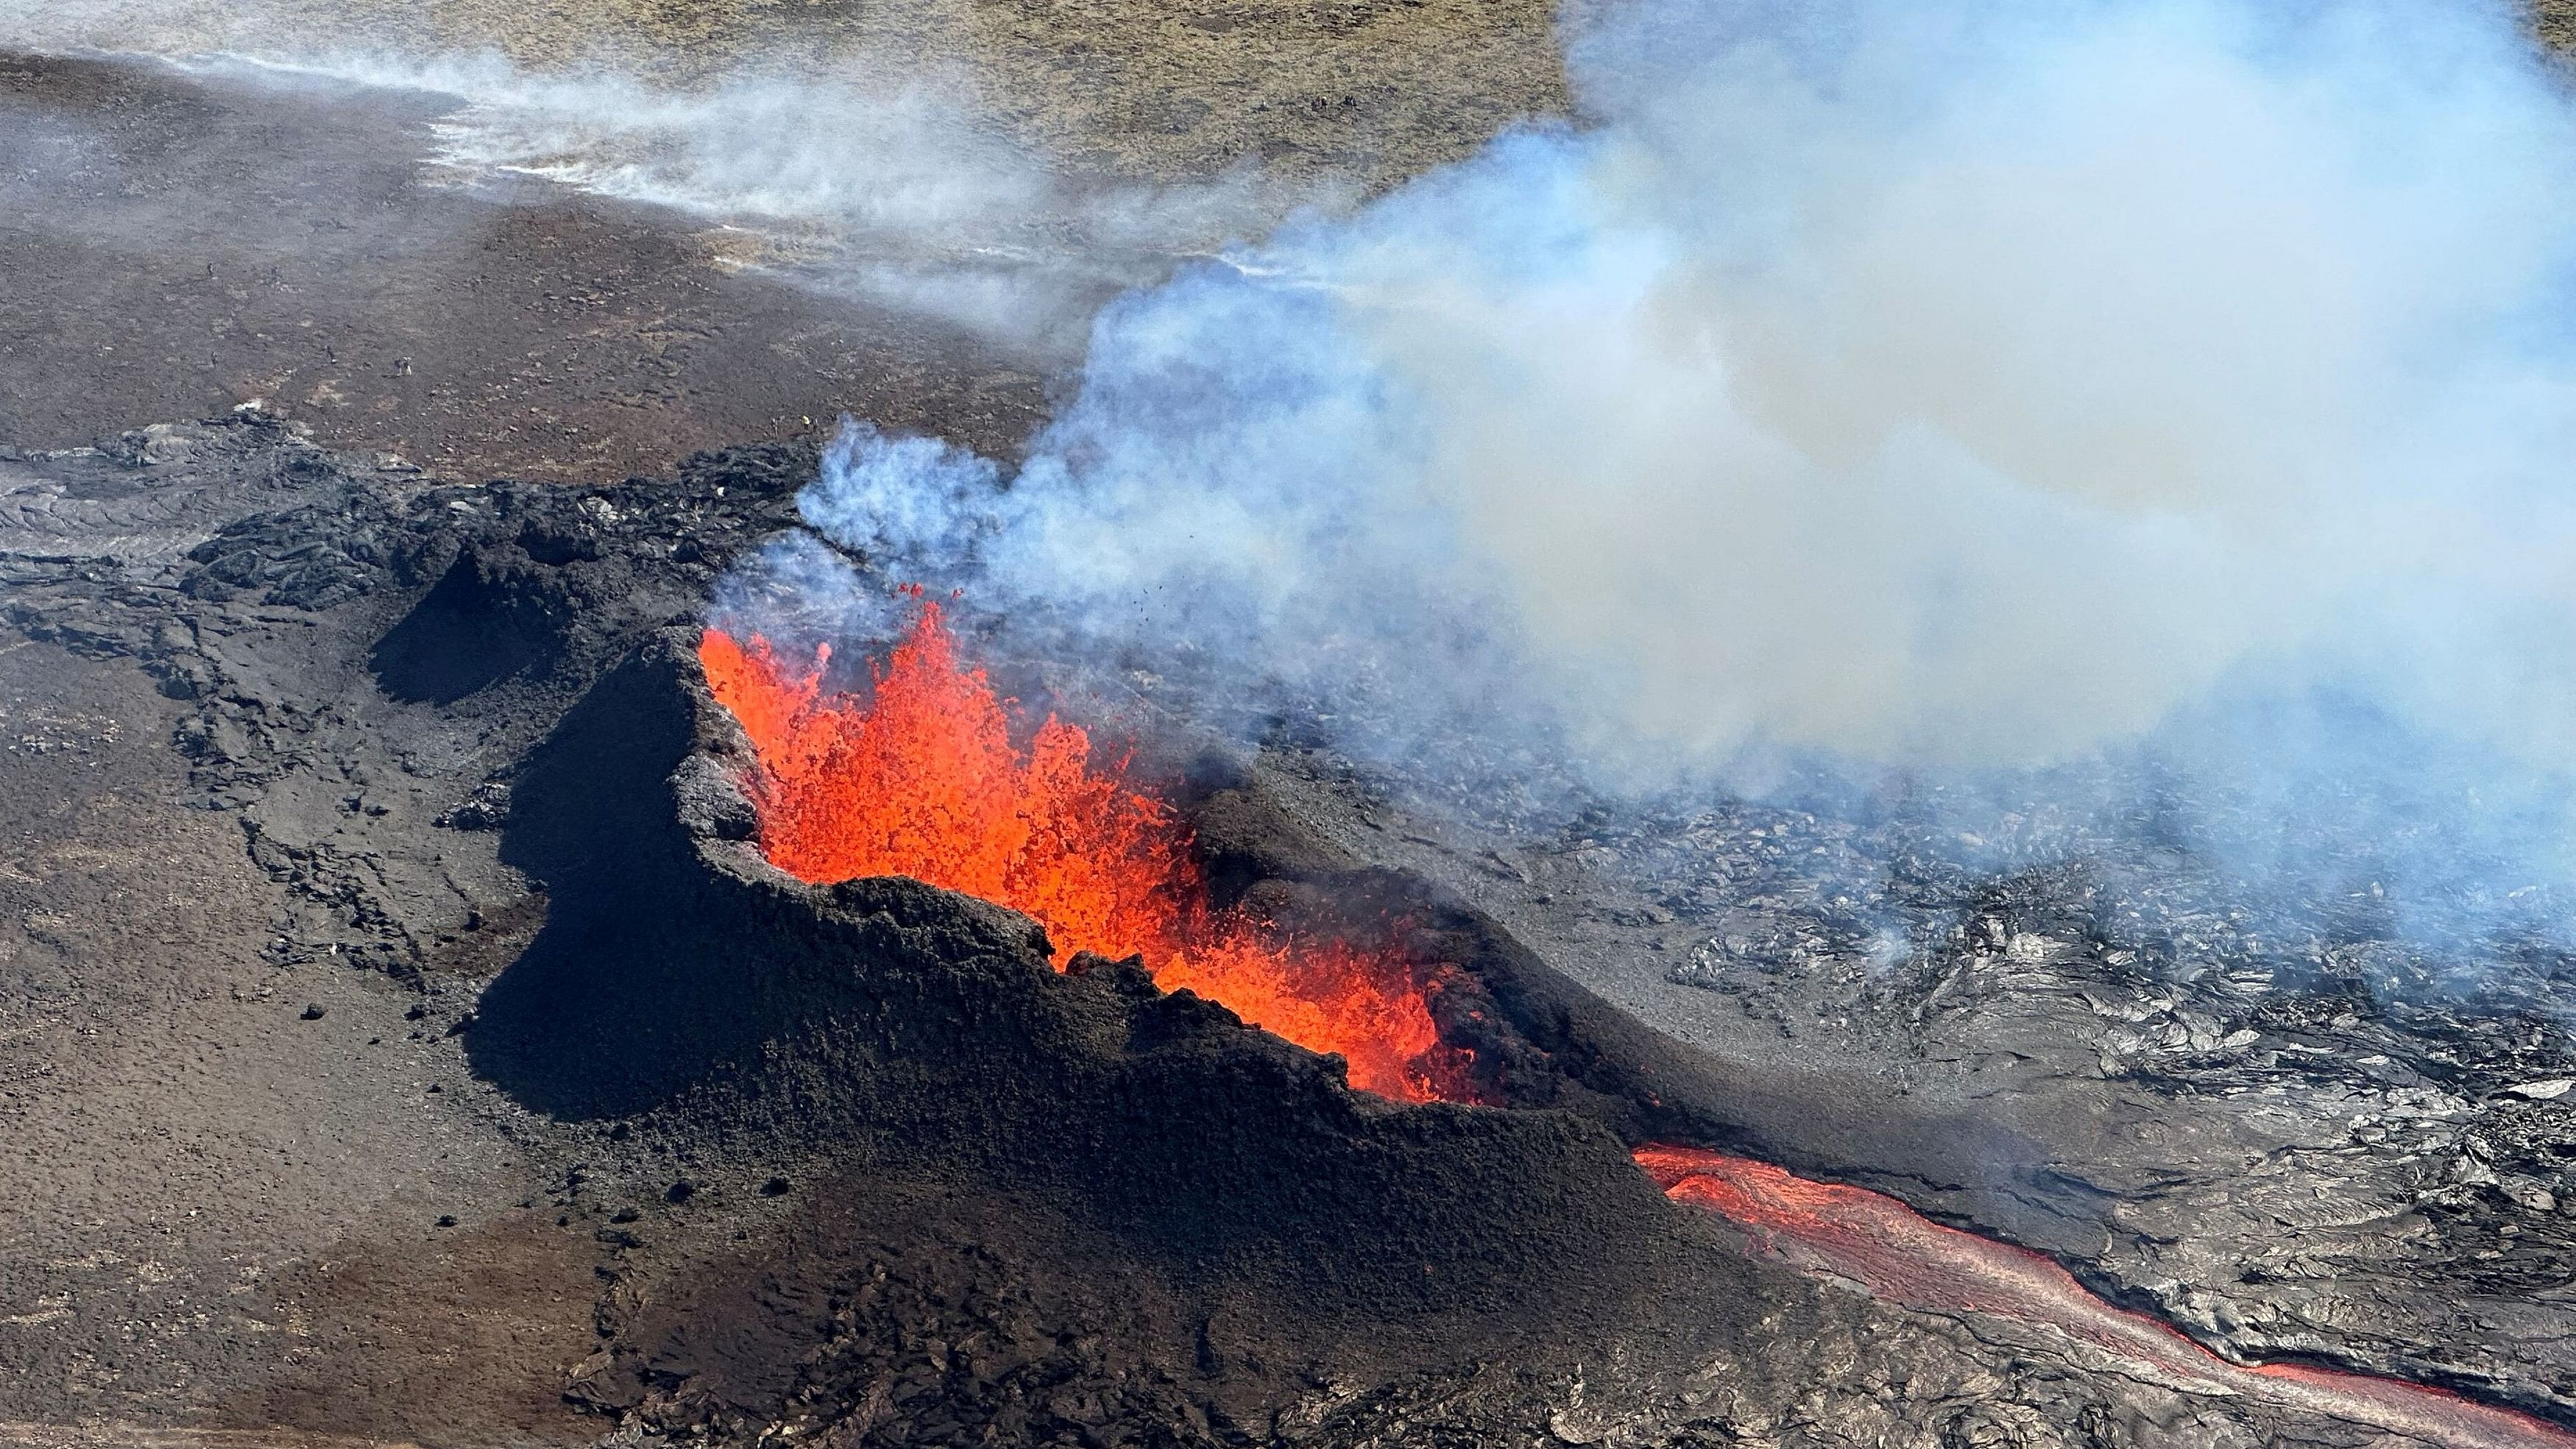 <div class="paragraphs"><p>Lava spurts and flows after the eruption of a volcano in the Reykjanes Peninsula.&nbsp;</p></div>